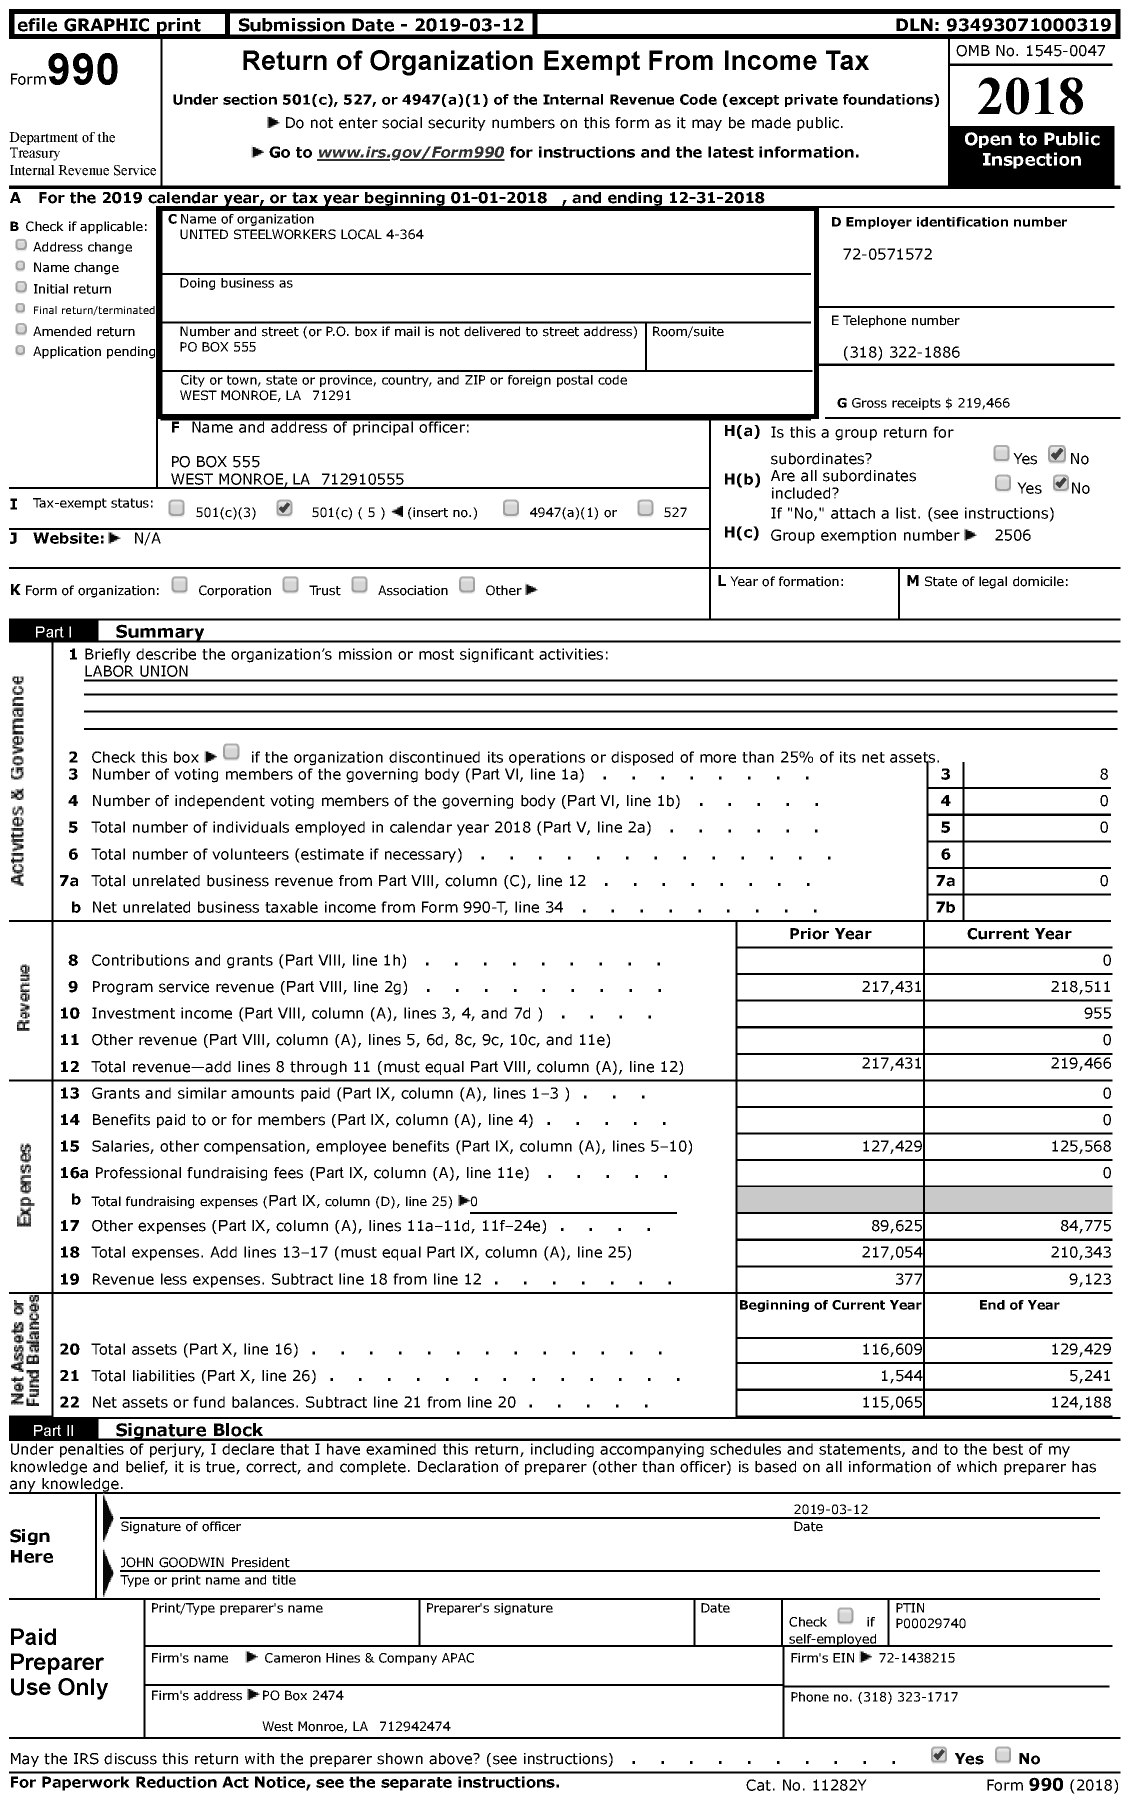 Image of first page of 2018 Form 990 for United Steelworkers - 00364 Local